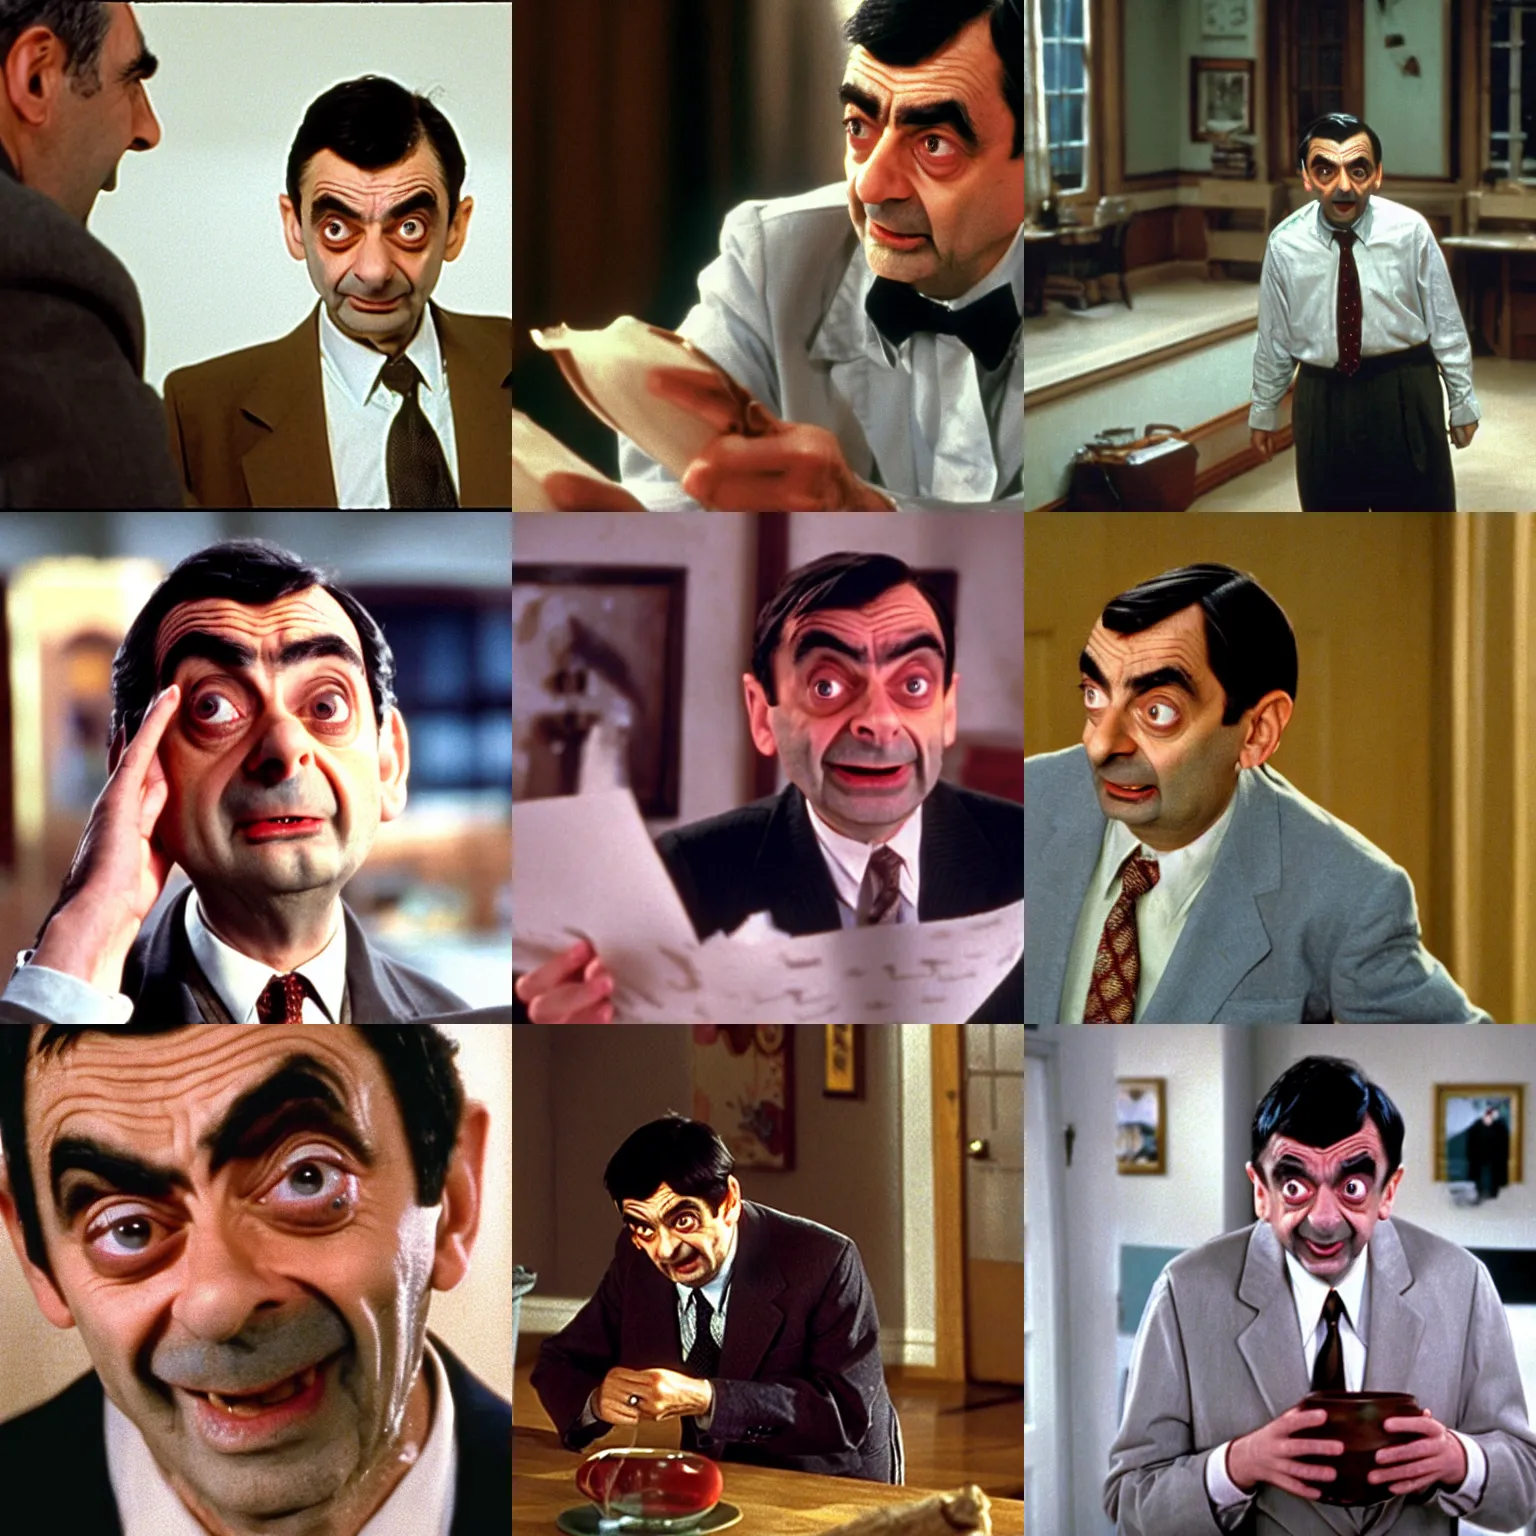 Prompt: A film still of Mr. Bean in the film Misery (1990)